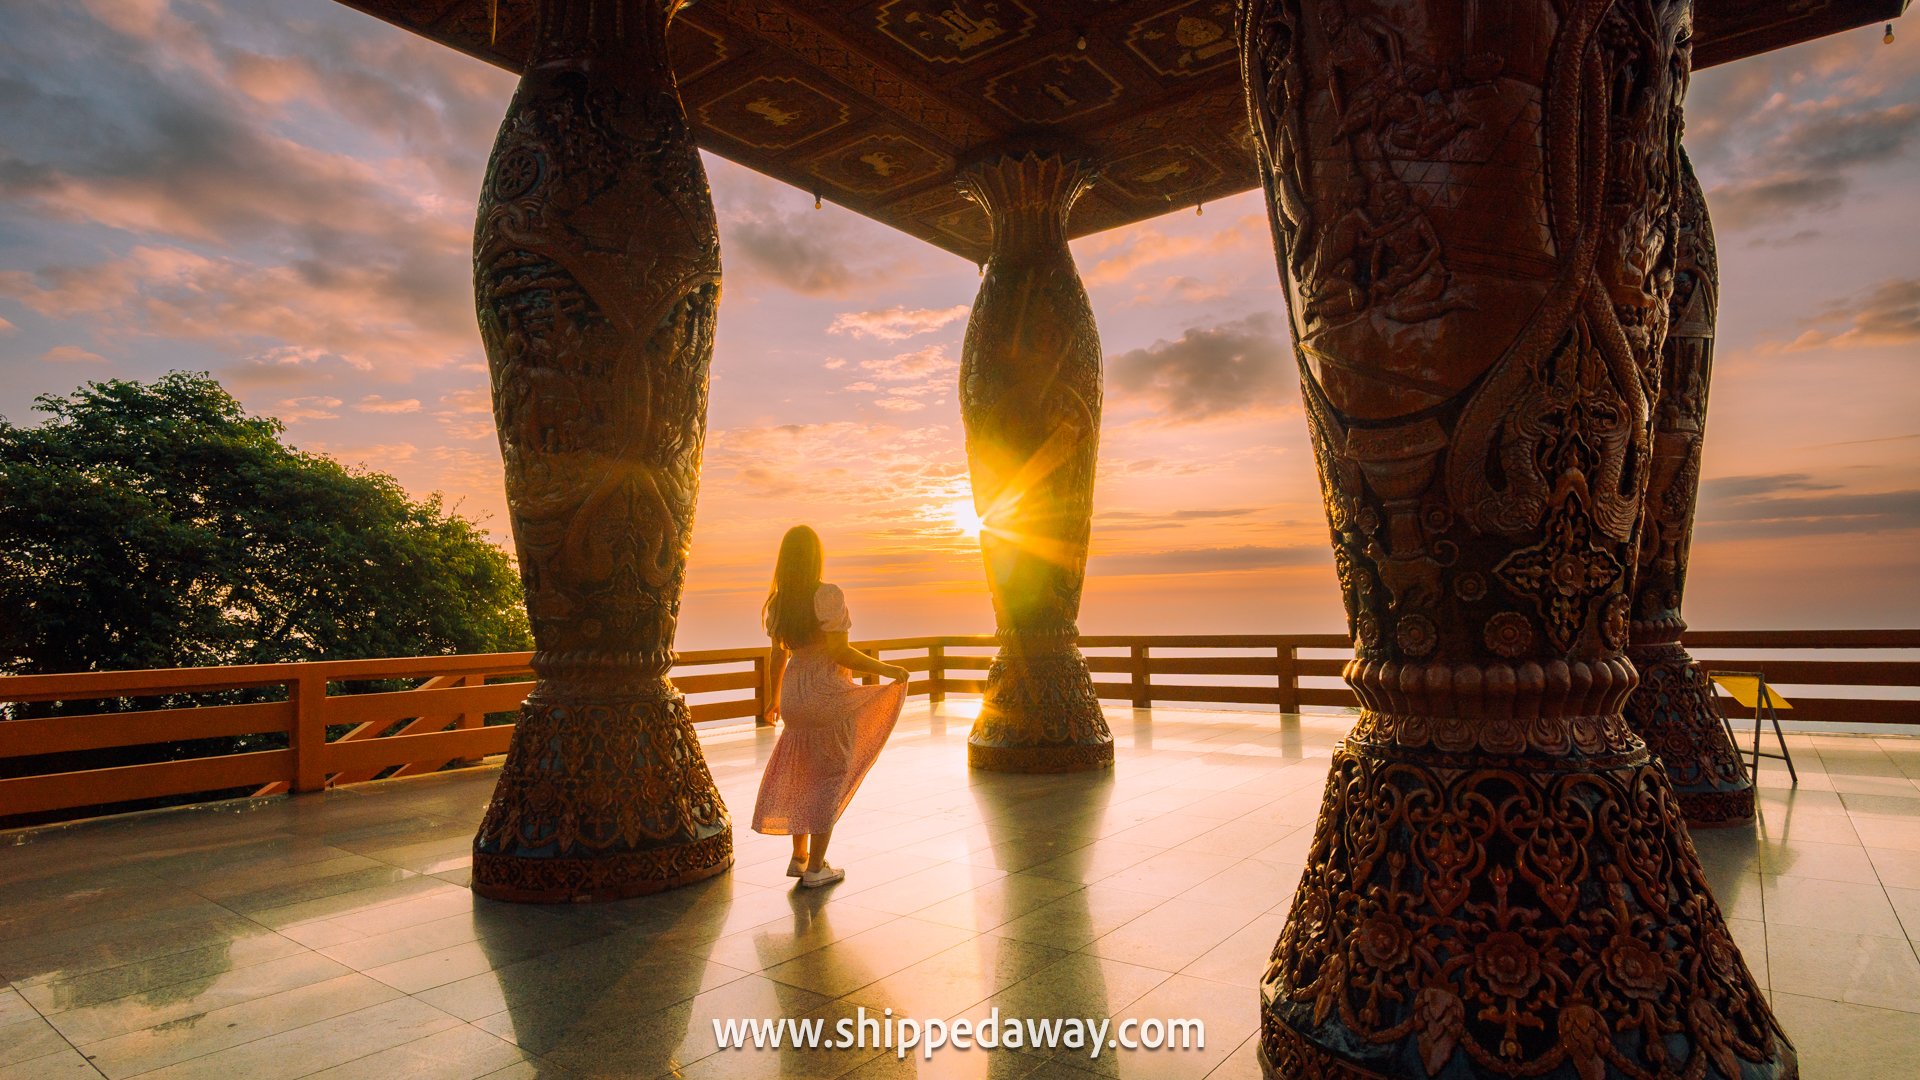 top things to do in Chiang Mai, Chiang Mai attractions - catching a sunrise at Wat Phra That Doi Suthep temple above Chiang Mai